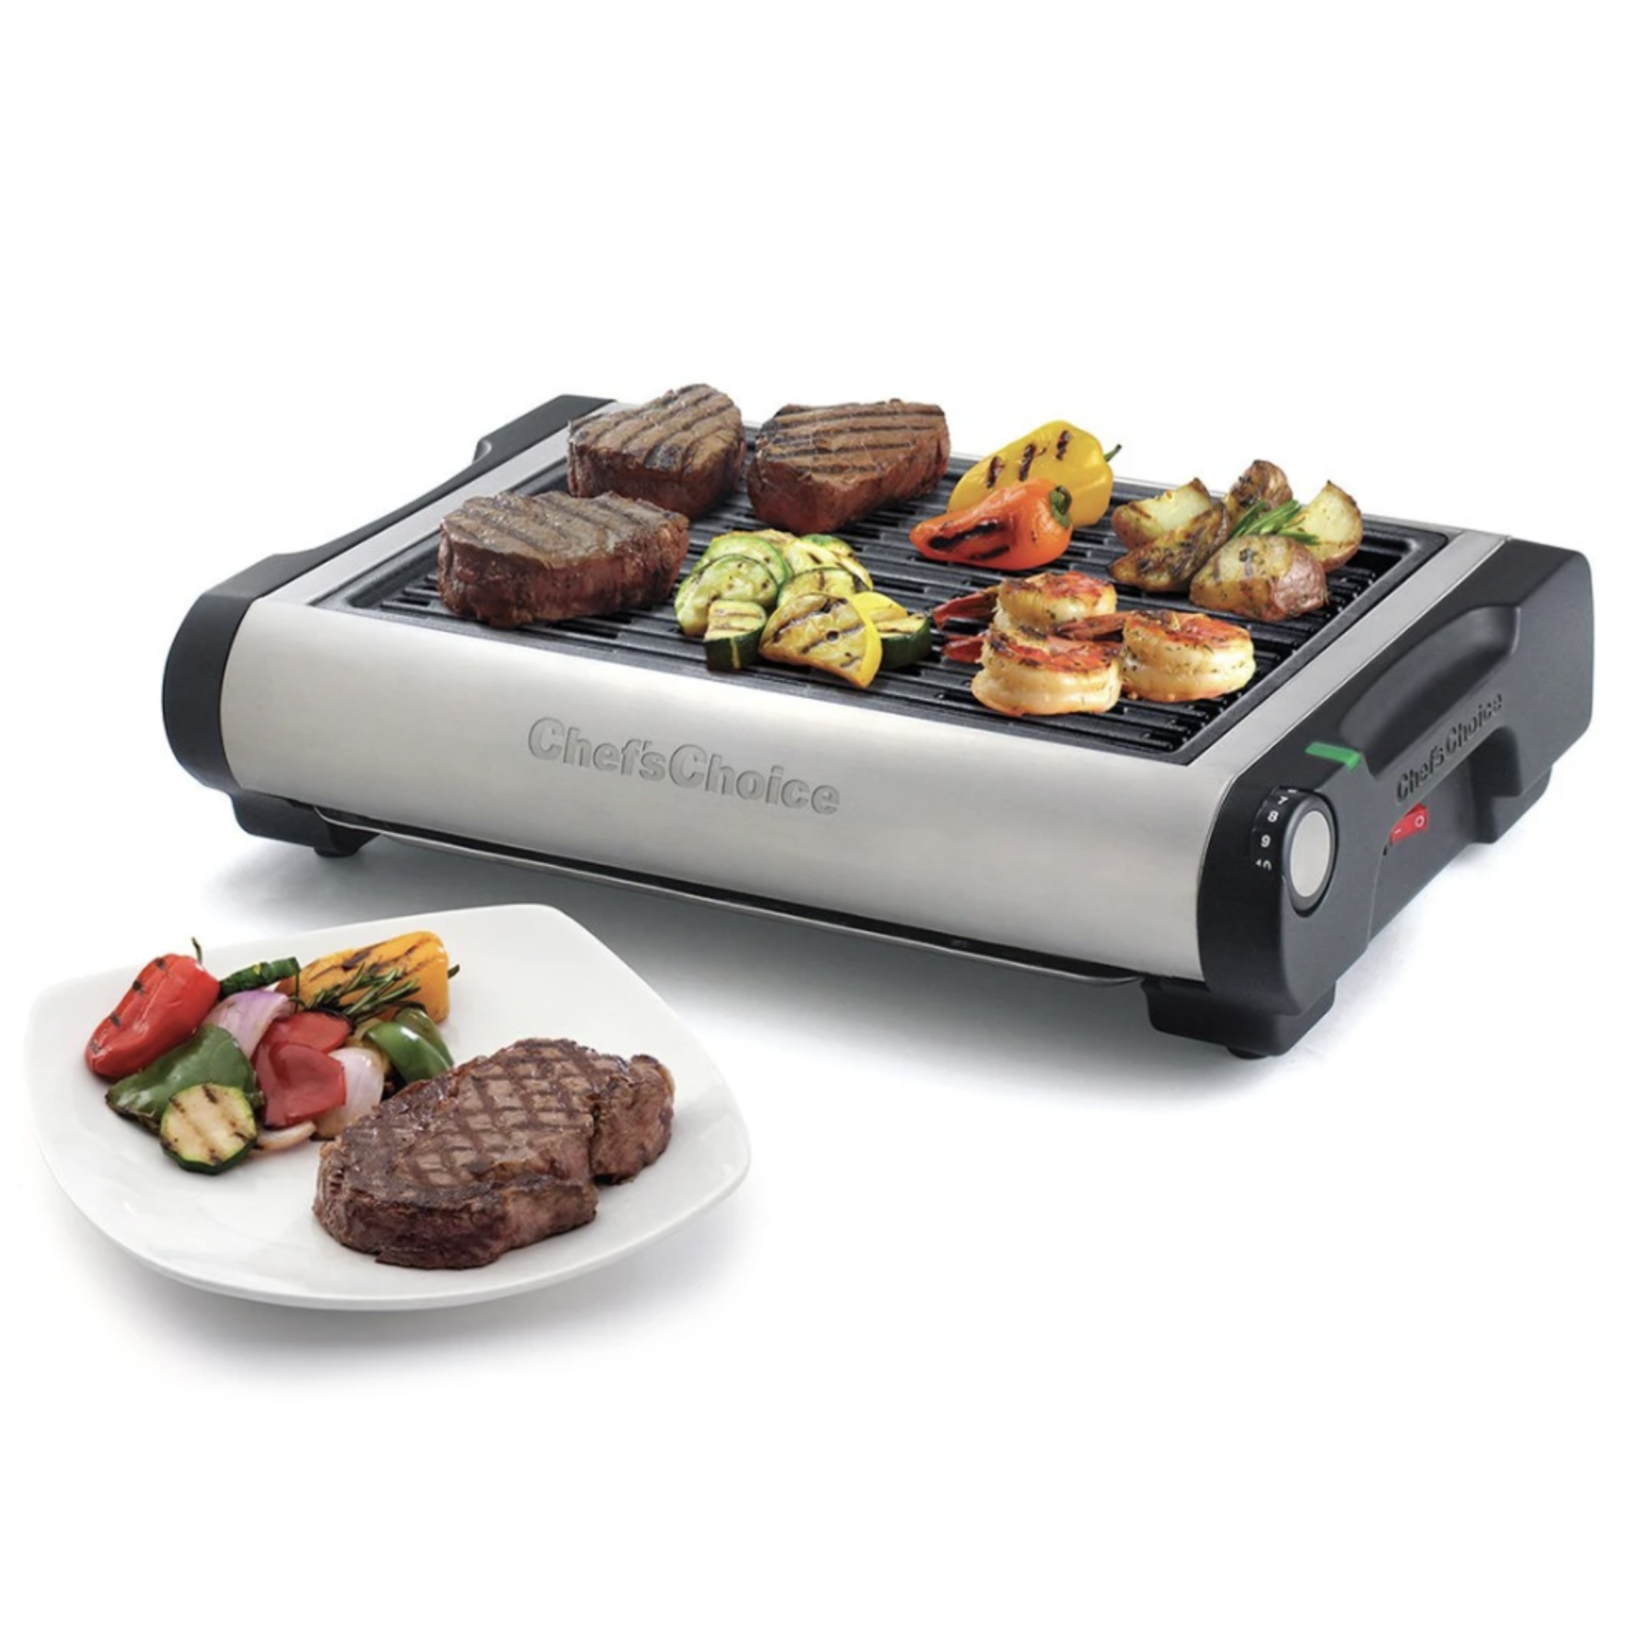 CHEF'S CHOICE CHEF'S CHOICE Grill Plate Use with M880 REG $69.99